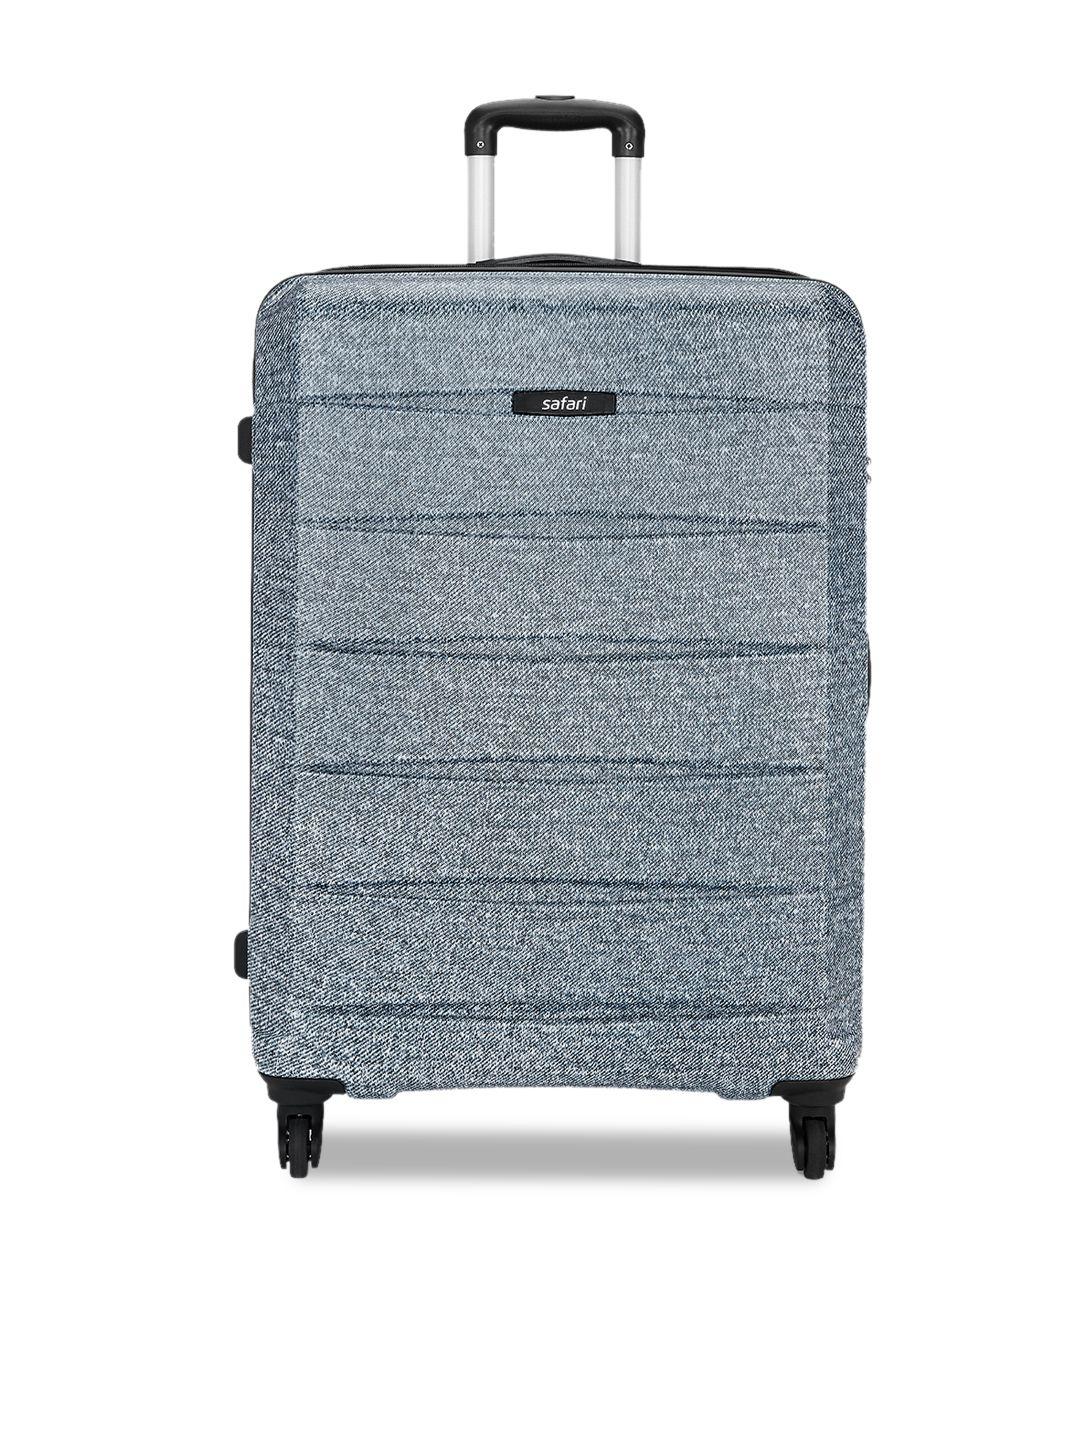 safari-textured-large-hard-sided-trolley-suitcase-123-l